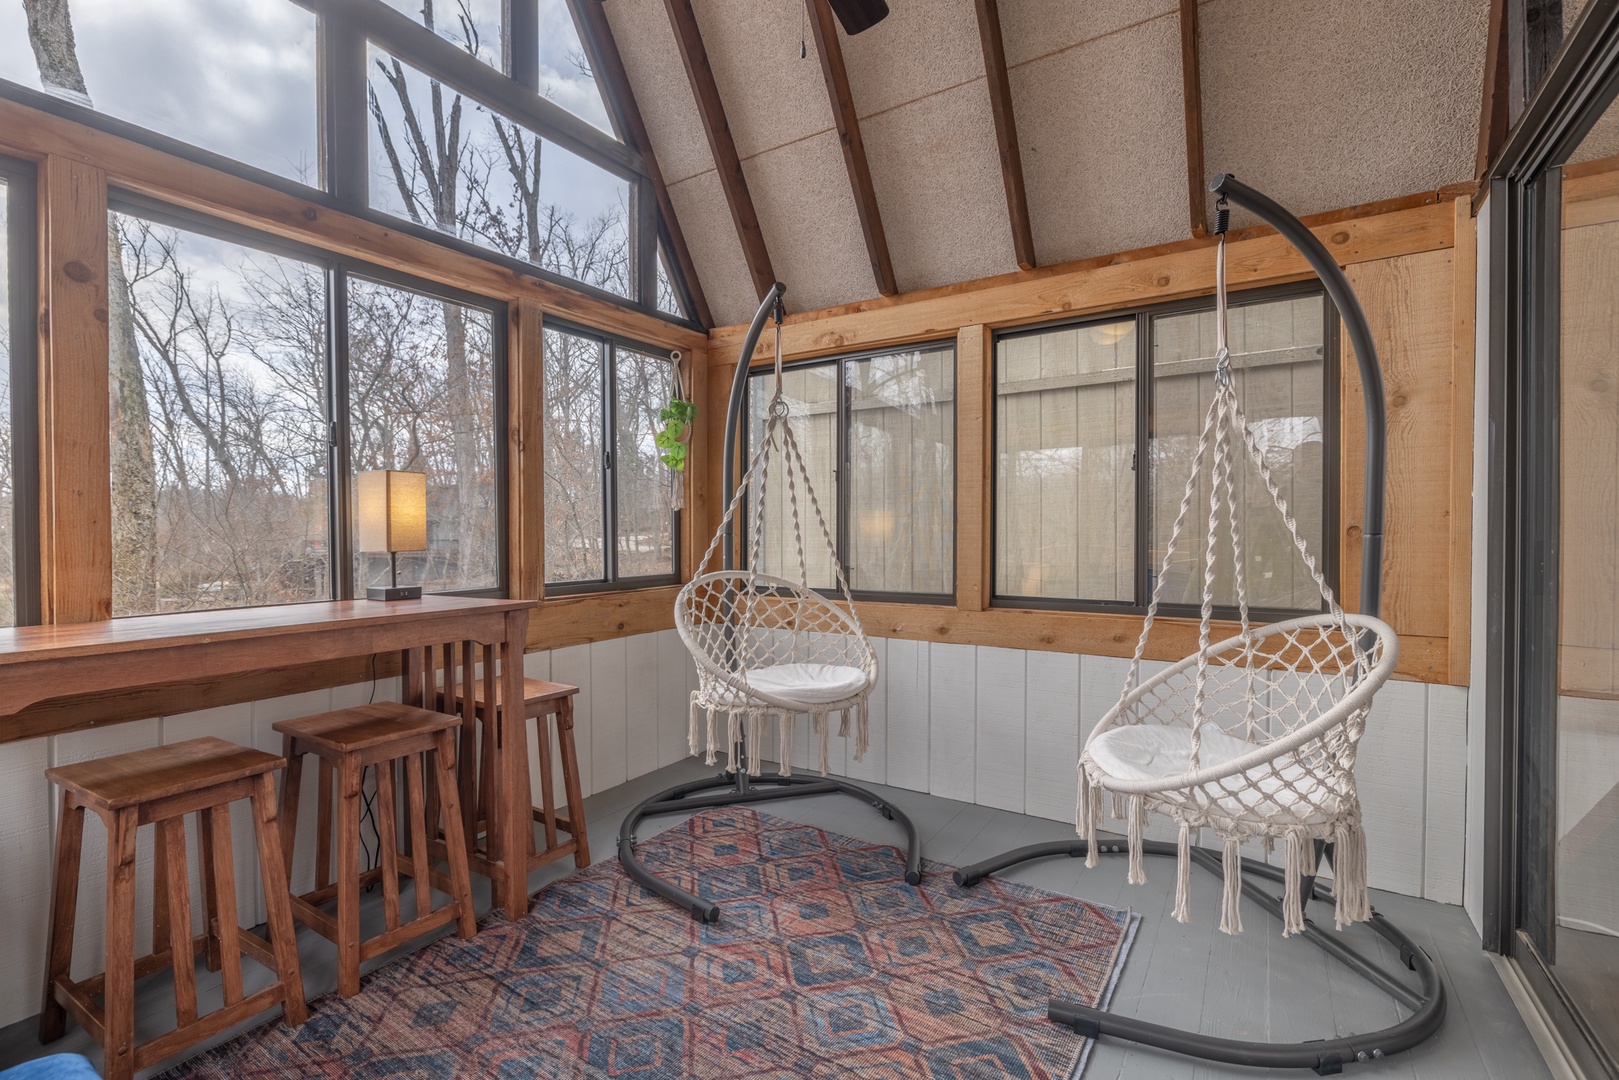 The sunroom is a perfect place to relax with a loved one as you share the pair of hanging chairs.